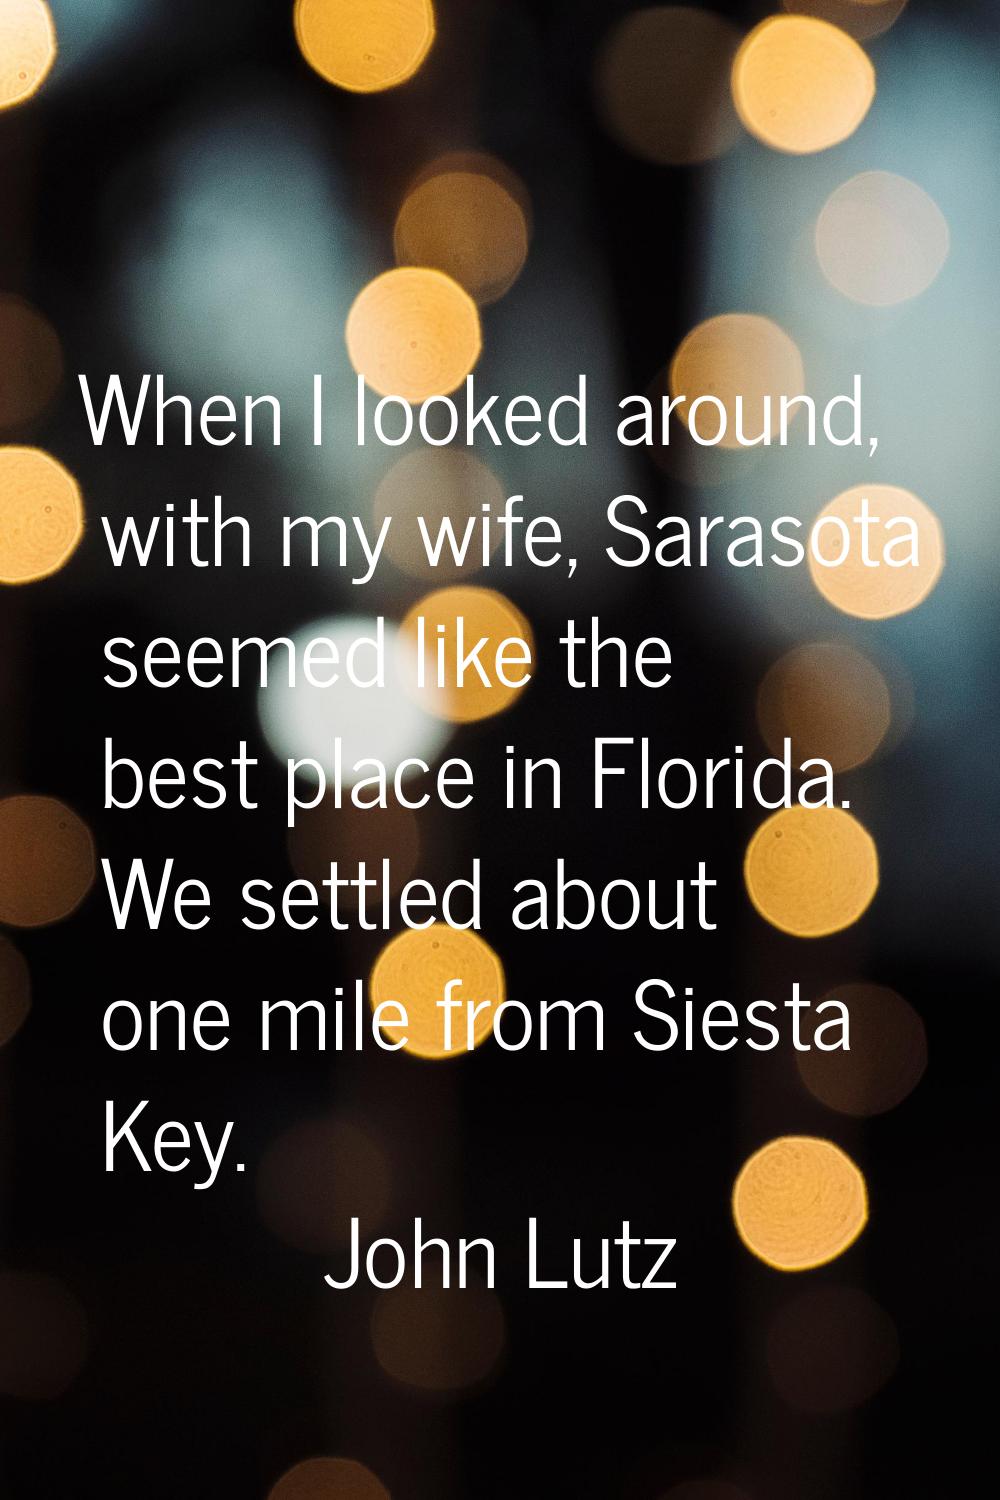 When I looked around, with my wife, Sarasota seemed like the best place in Florida. We settled abou